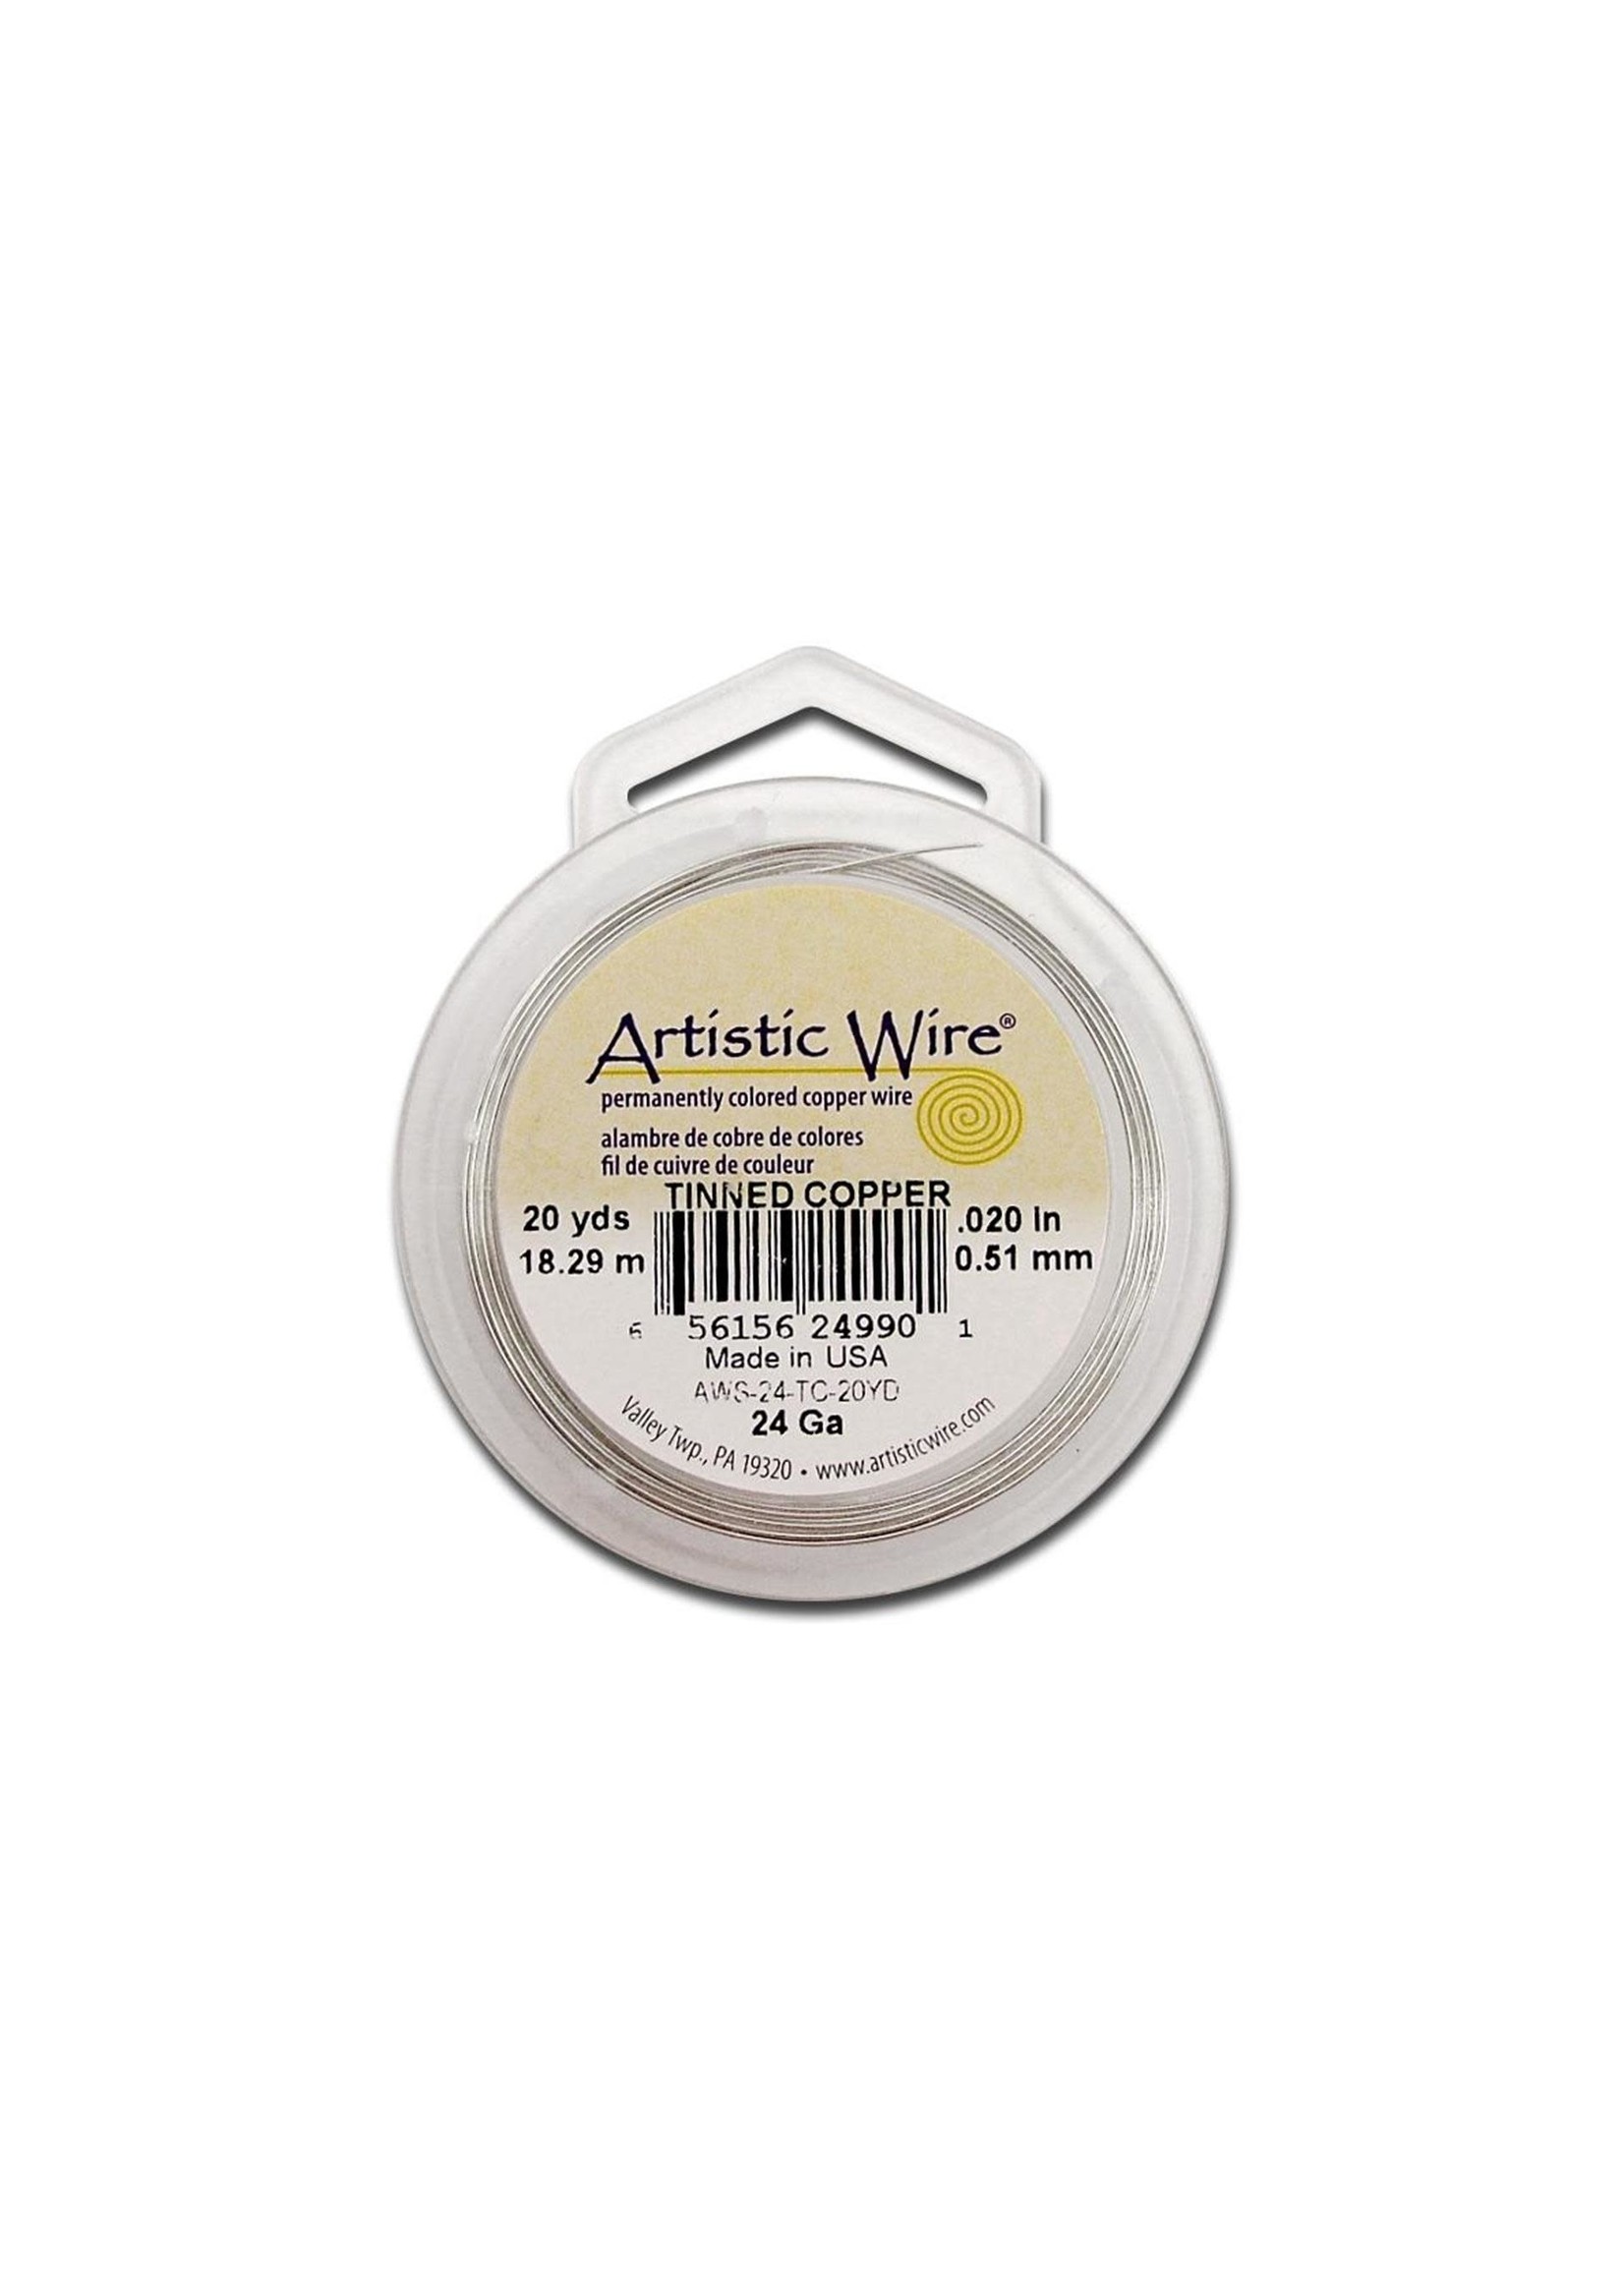 Artistic Wire 24Ga 20yd Tinned Copper/Plated Silver